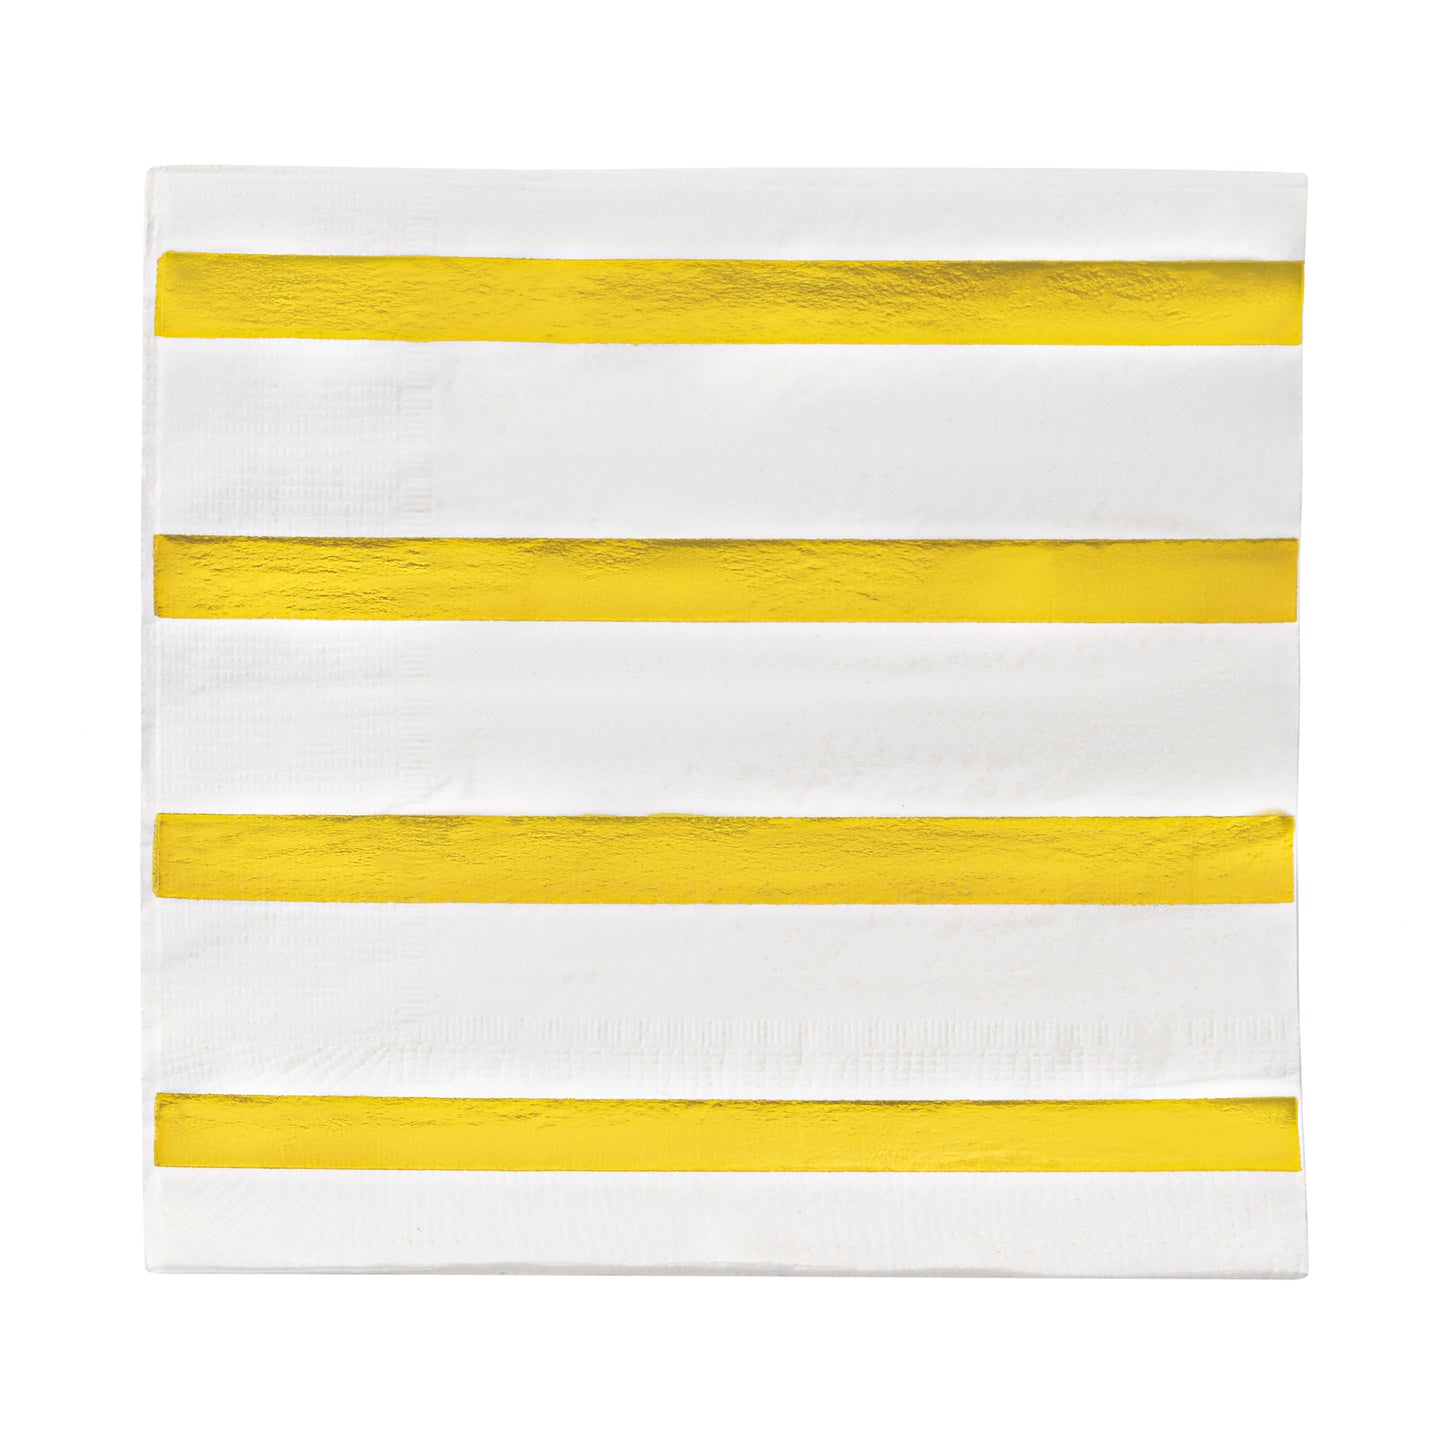 White with Gold Stripes Disposable Paper Beverage/Cocktail Napkins